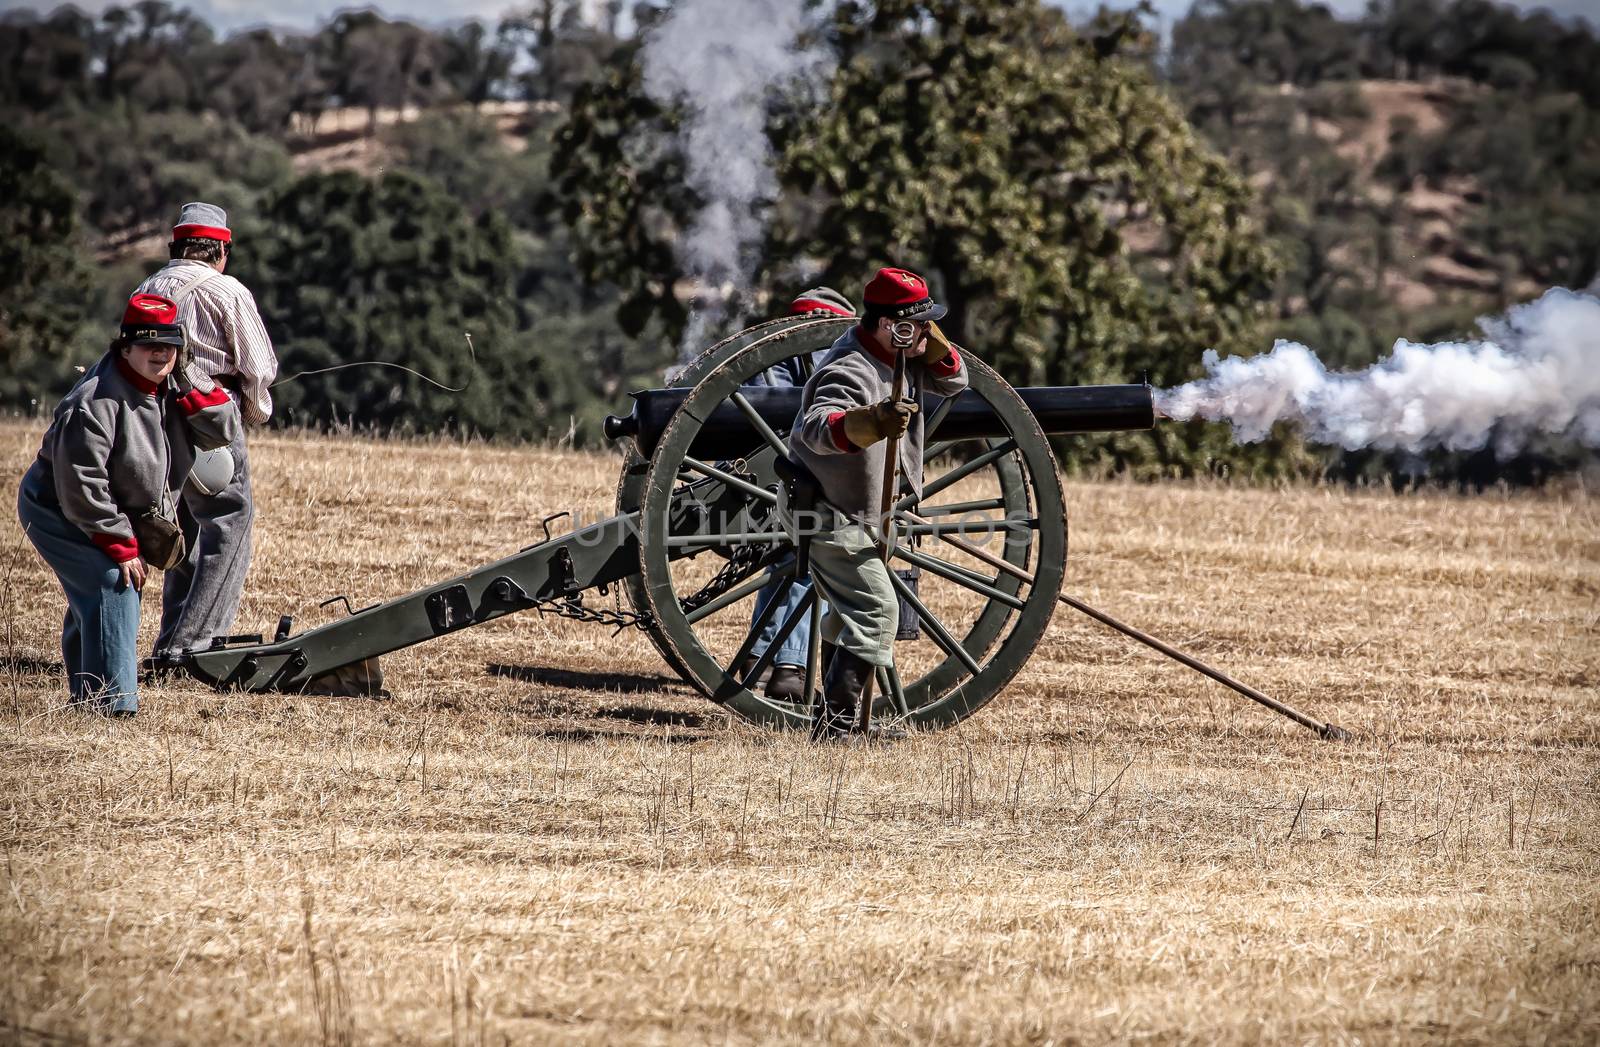 Confederate troops fire their cannon during a Civil War reenactment in Anderson, California.
Photo taken on: September 27th, 2014